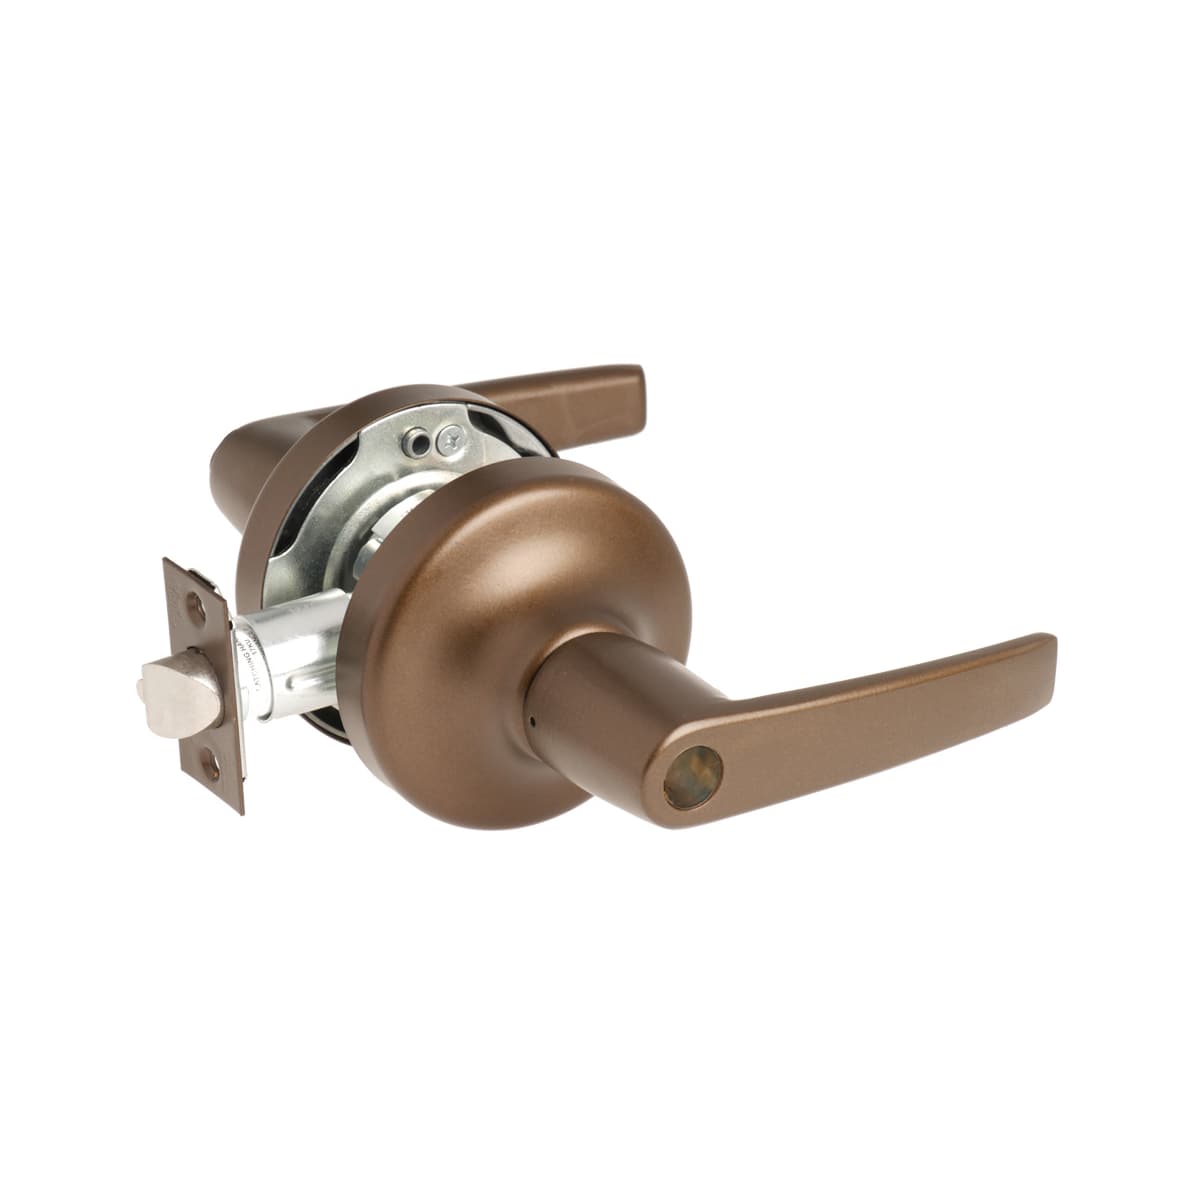 Details about   1– Yale AU 5307LN Grade 2 Cylindrical Lever This is Zero Bitted Replaceable Core 